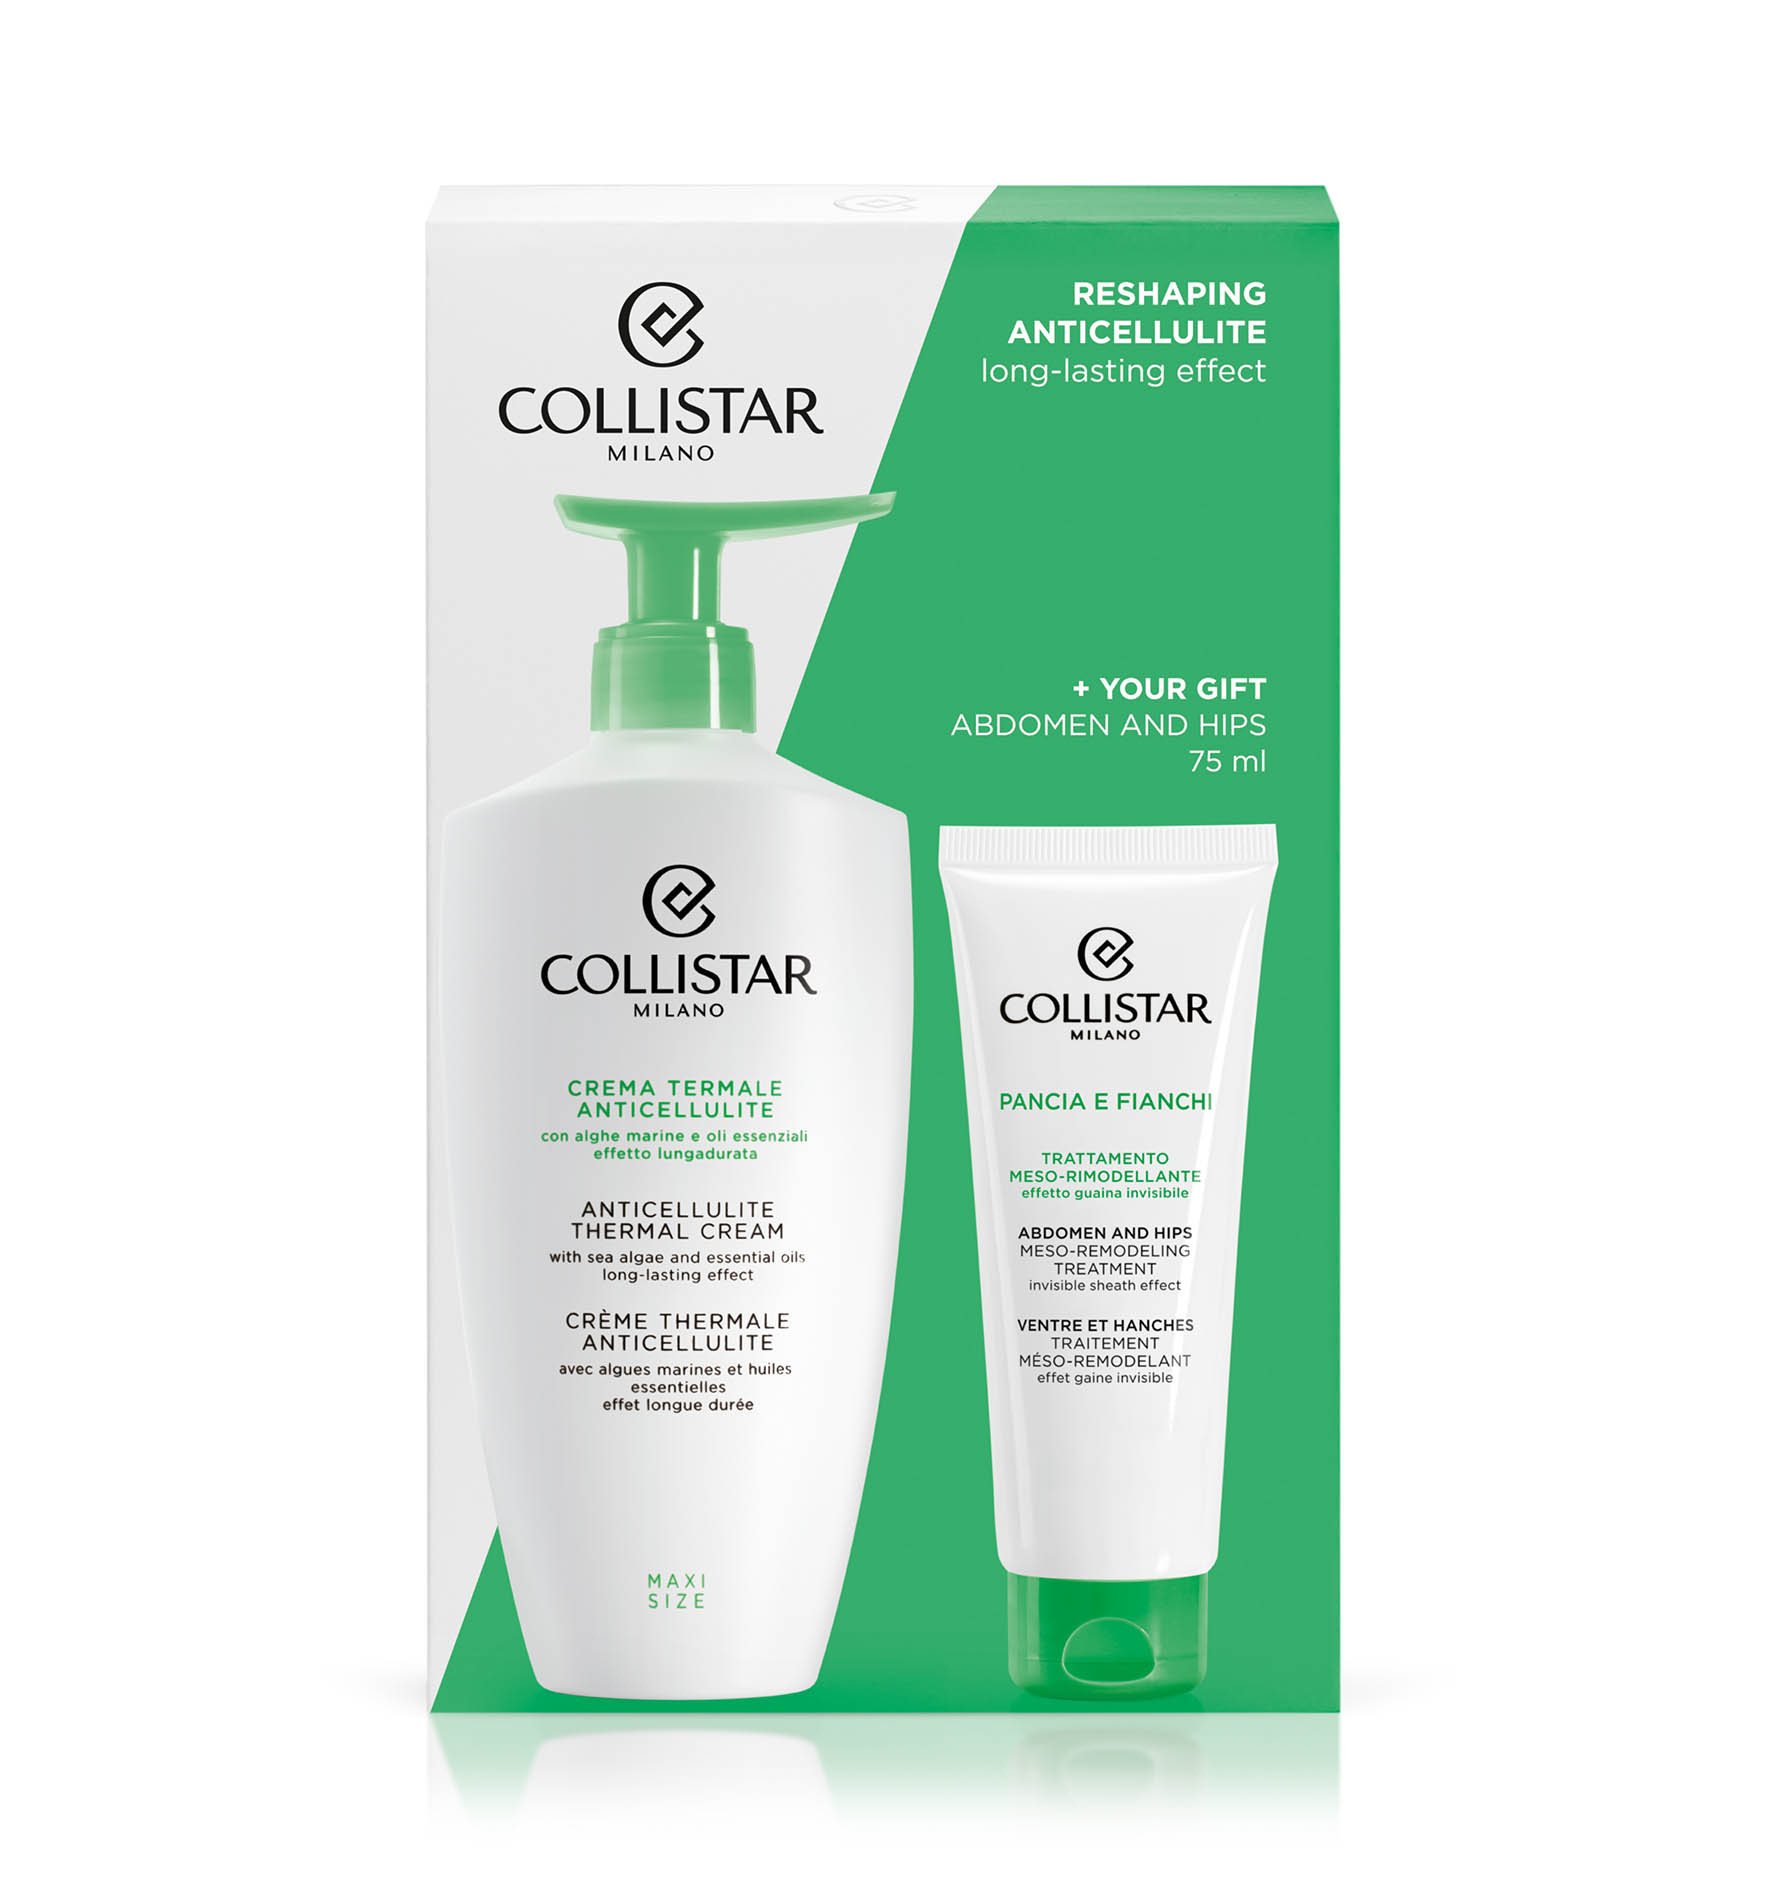 SET RESHAPING ANTICELLULITE long-lasting effect - Creams and Oils | Collistar - Shop Online Ufficiale